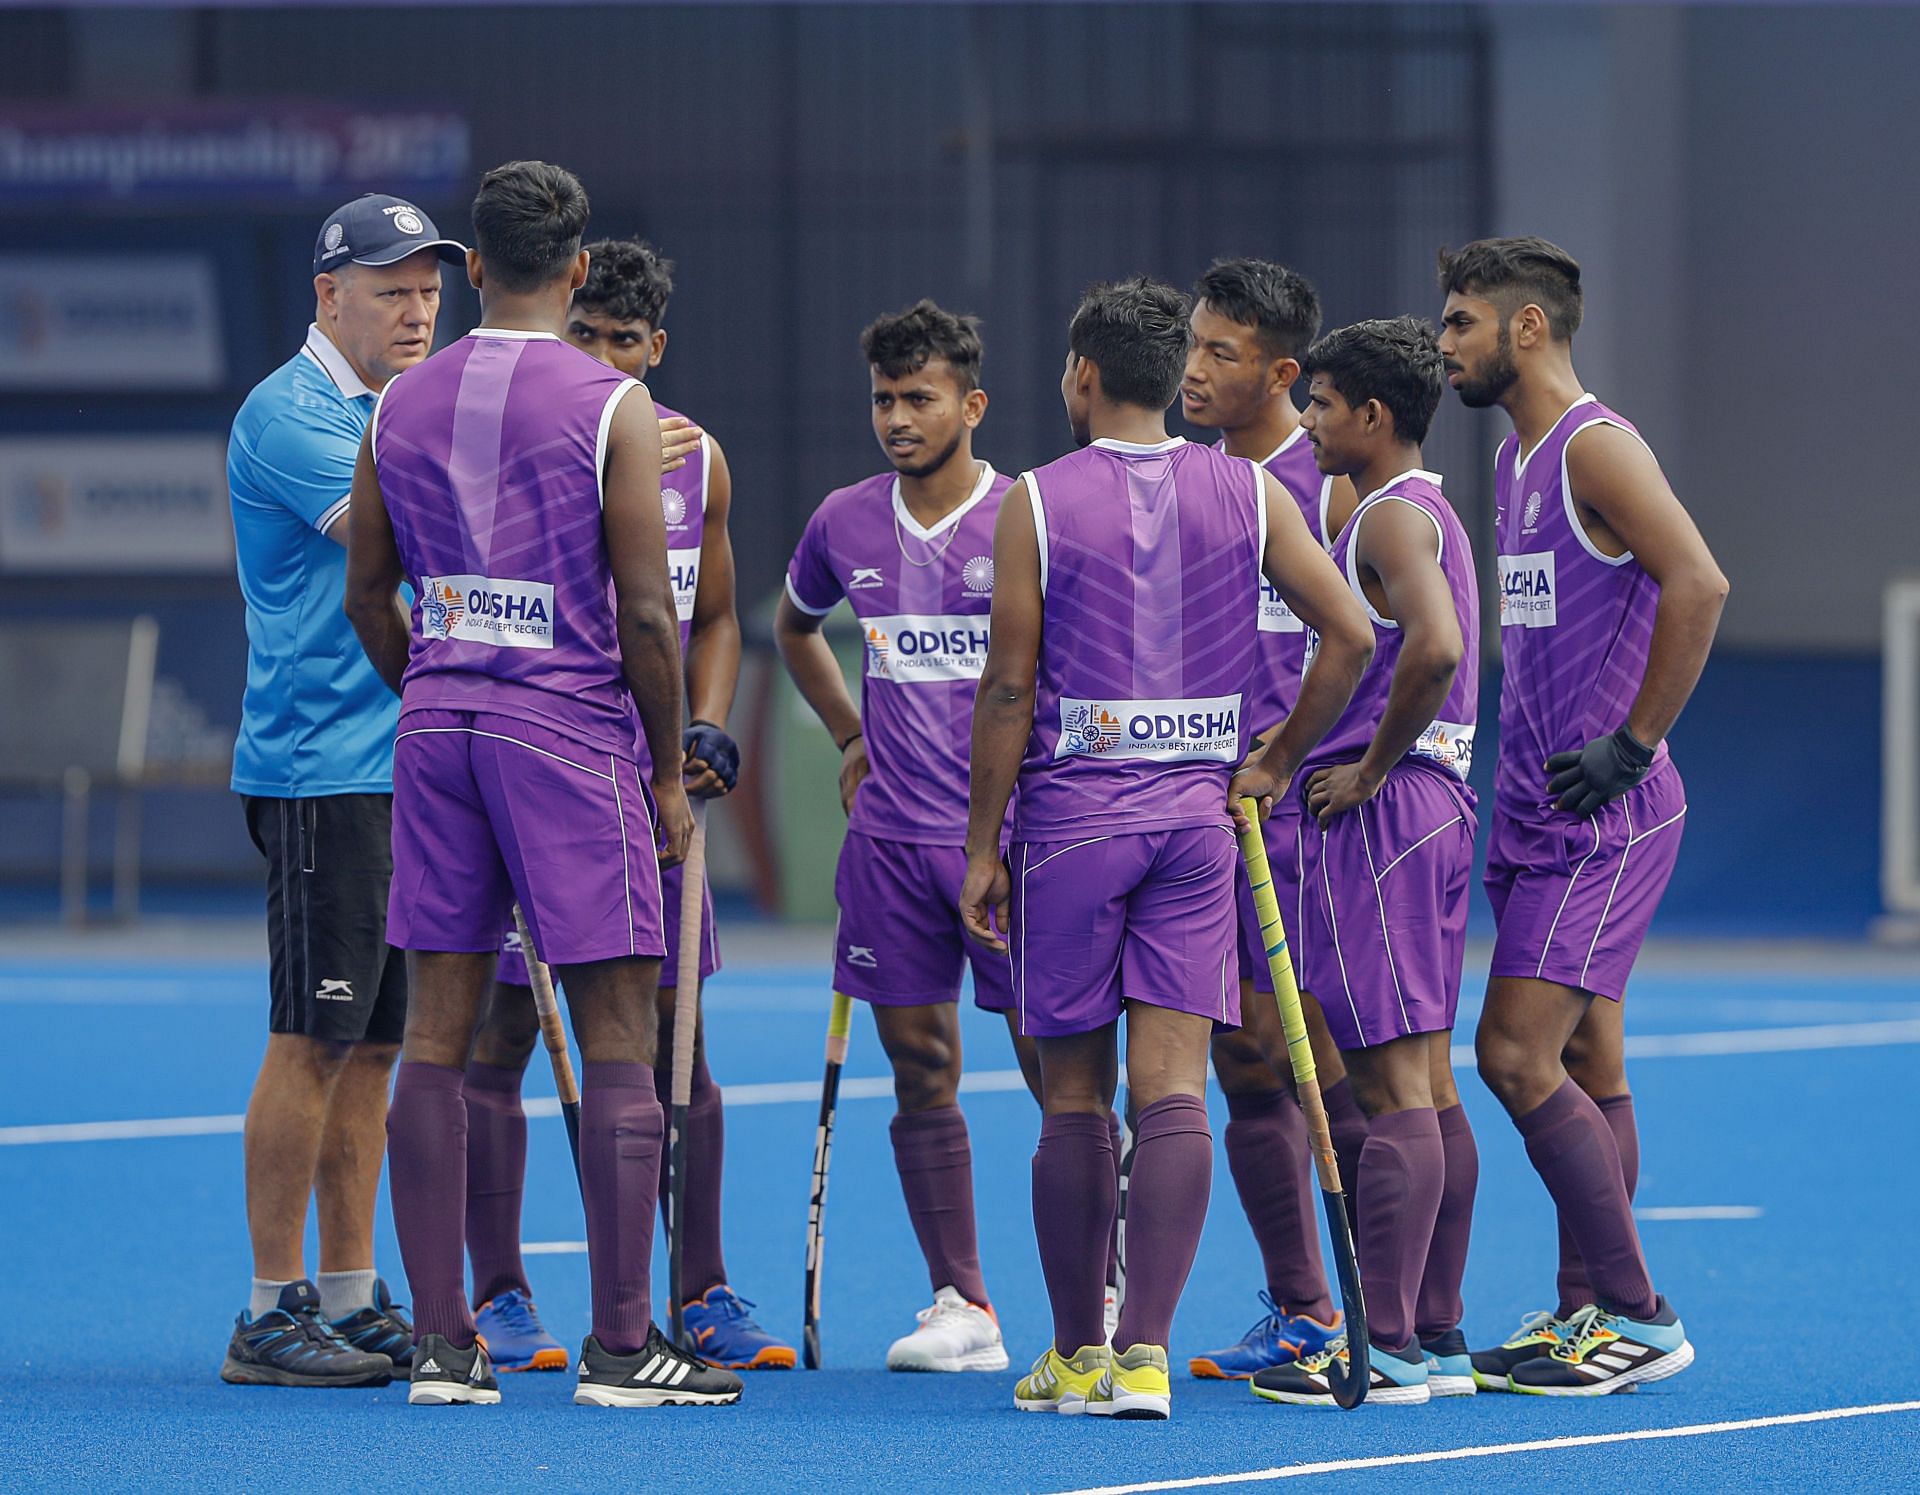 The Indian junior hockey team at a practice session. (PC: Hockey India)